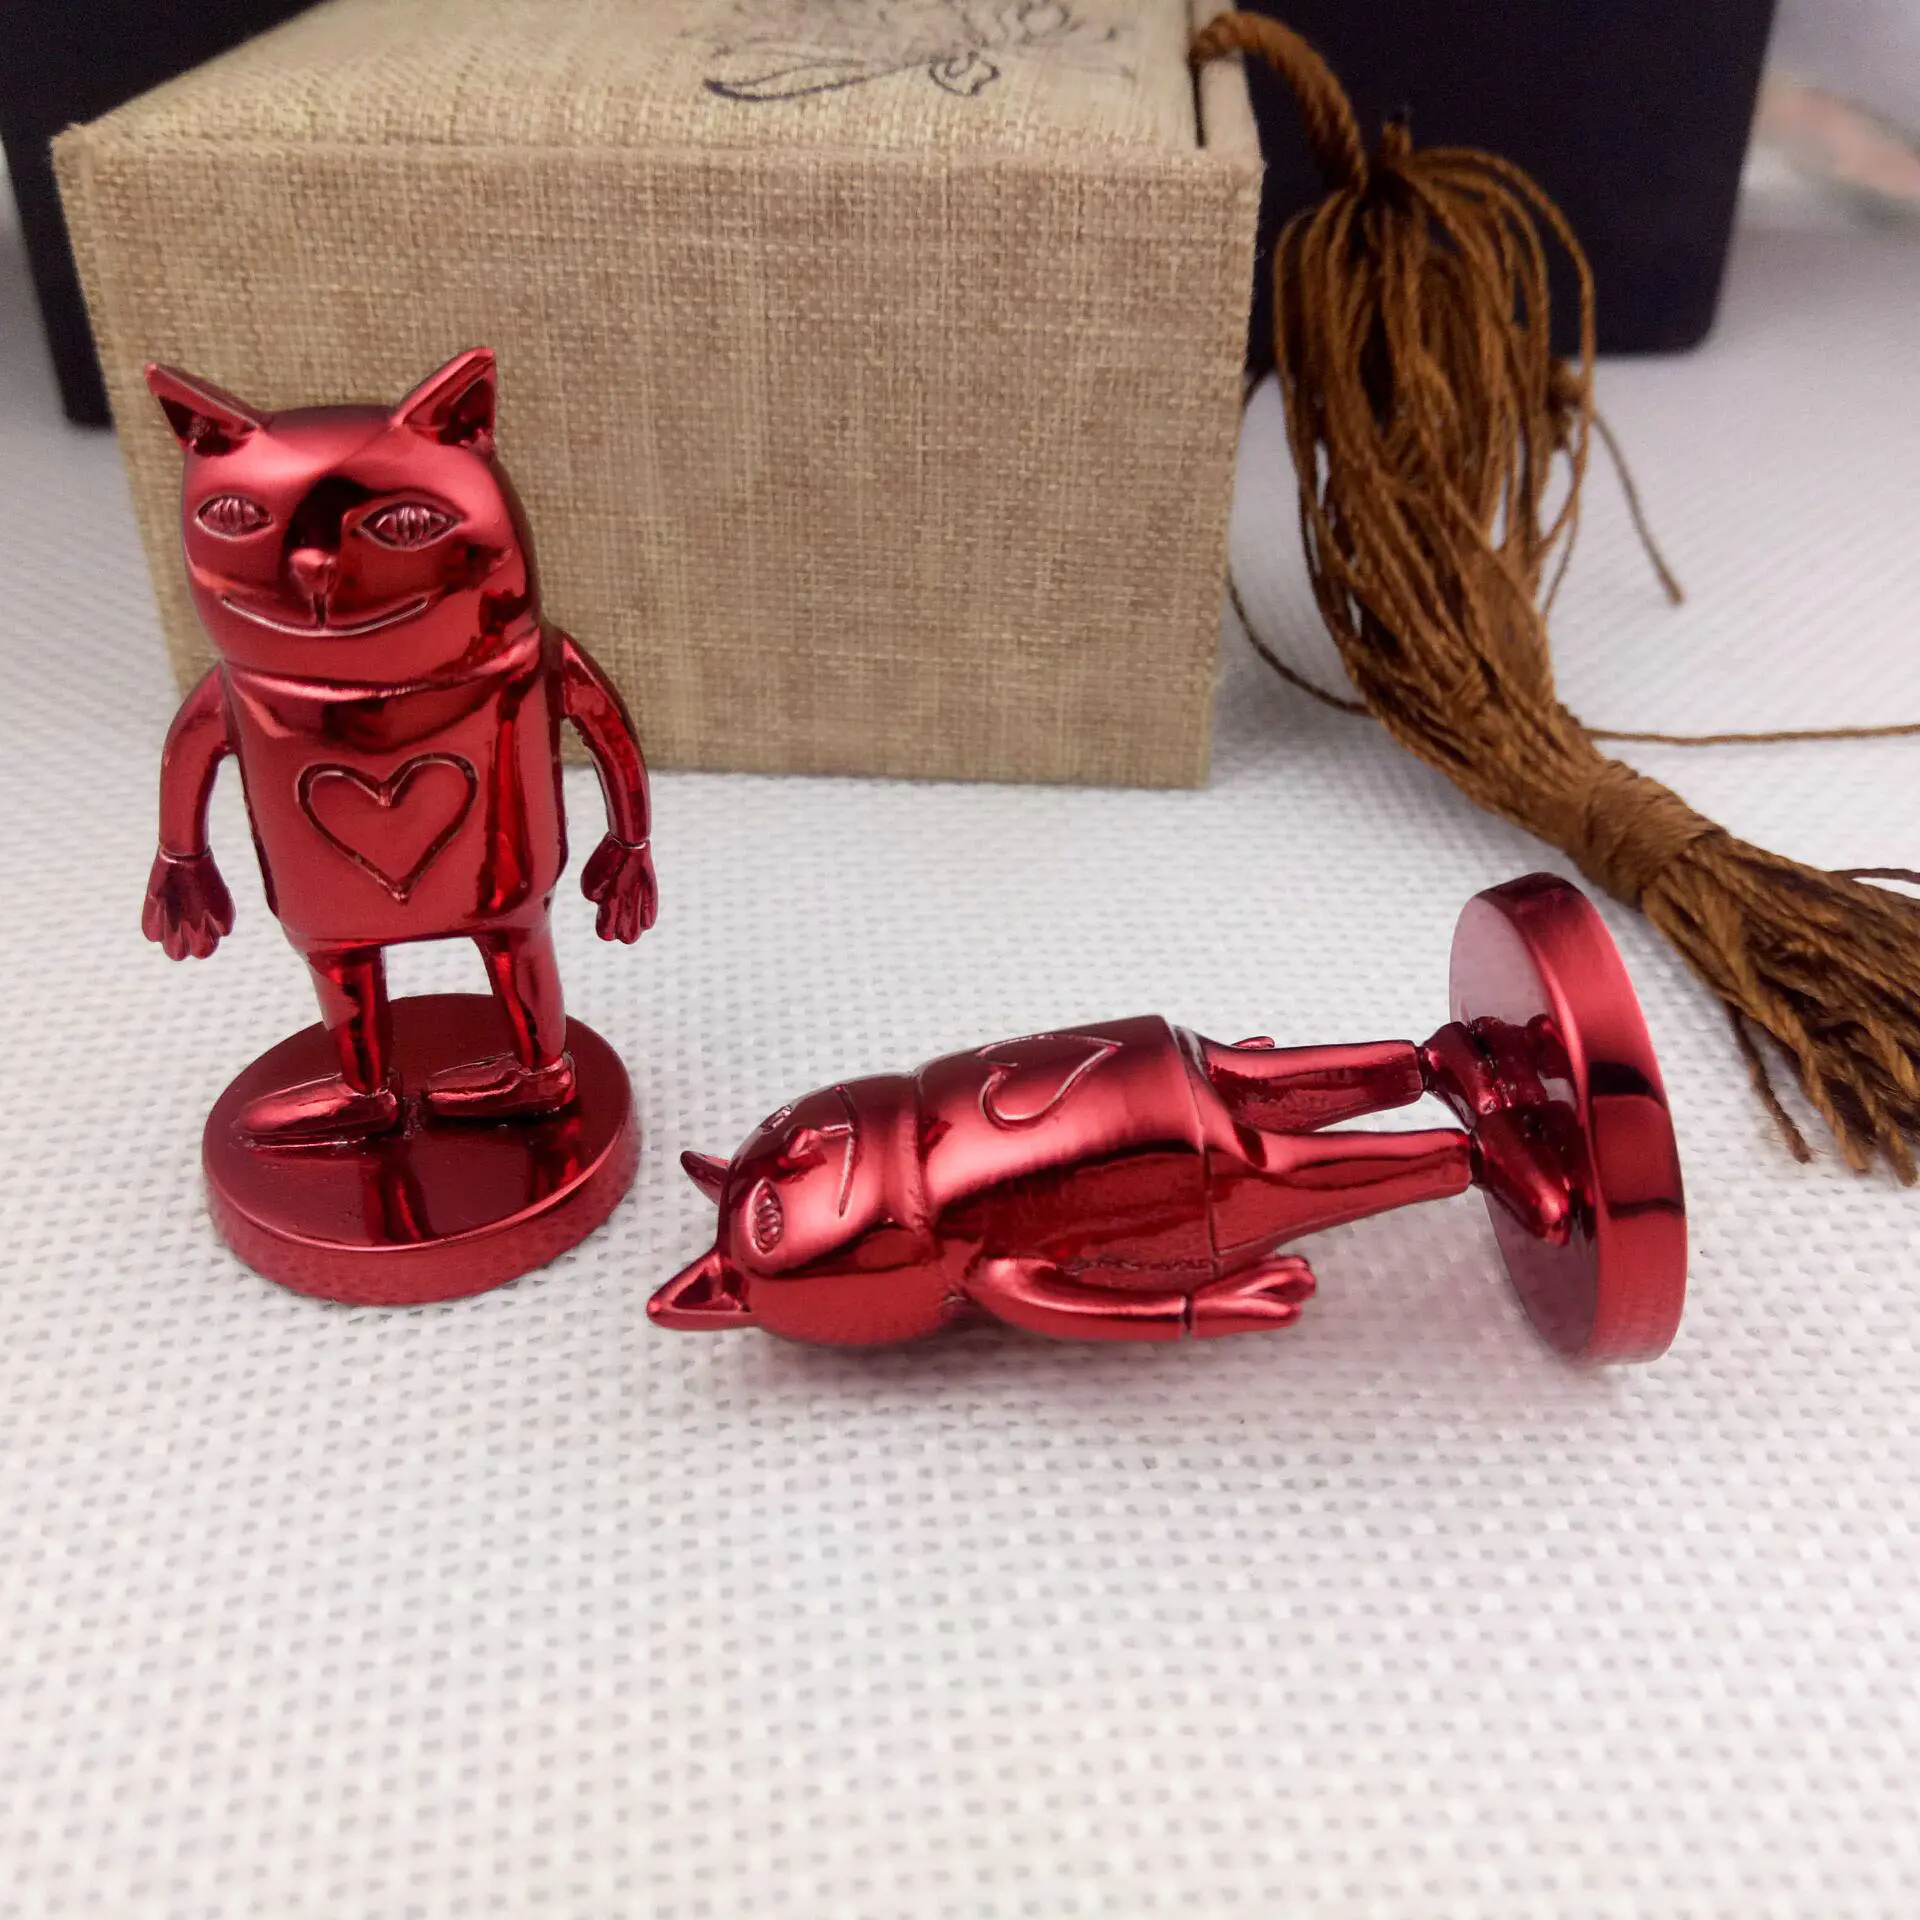 Red plating metal promotional cute action figures for games and movies